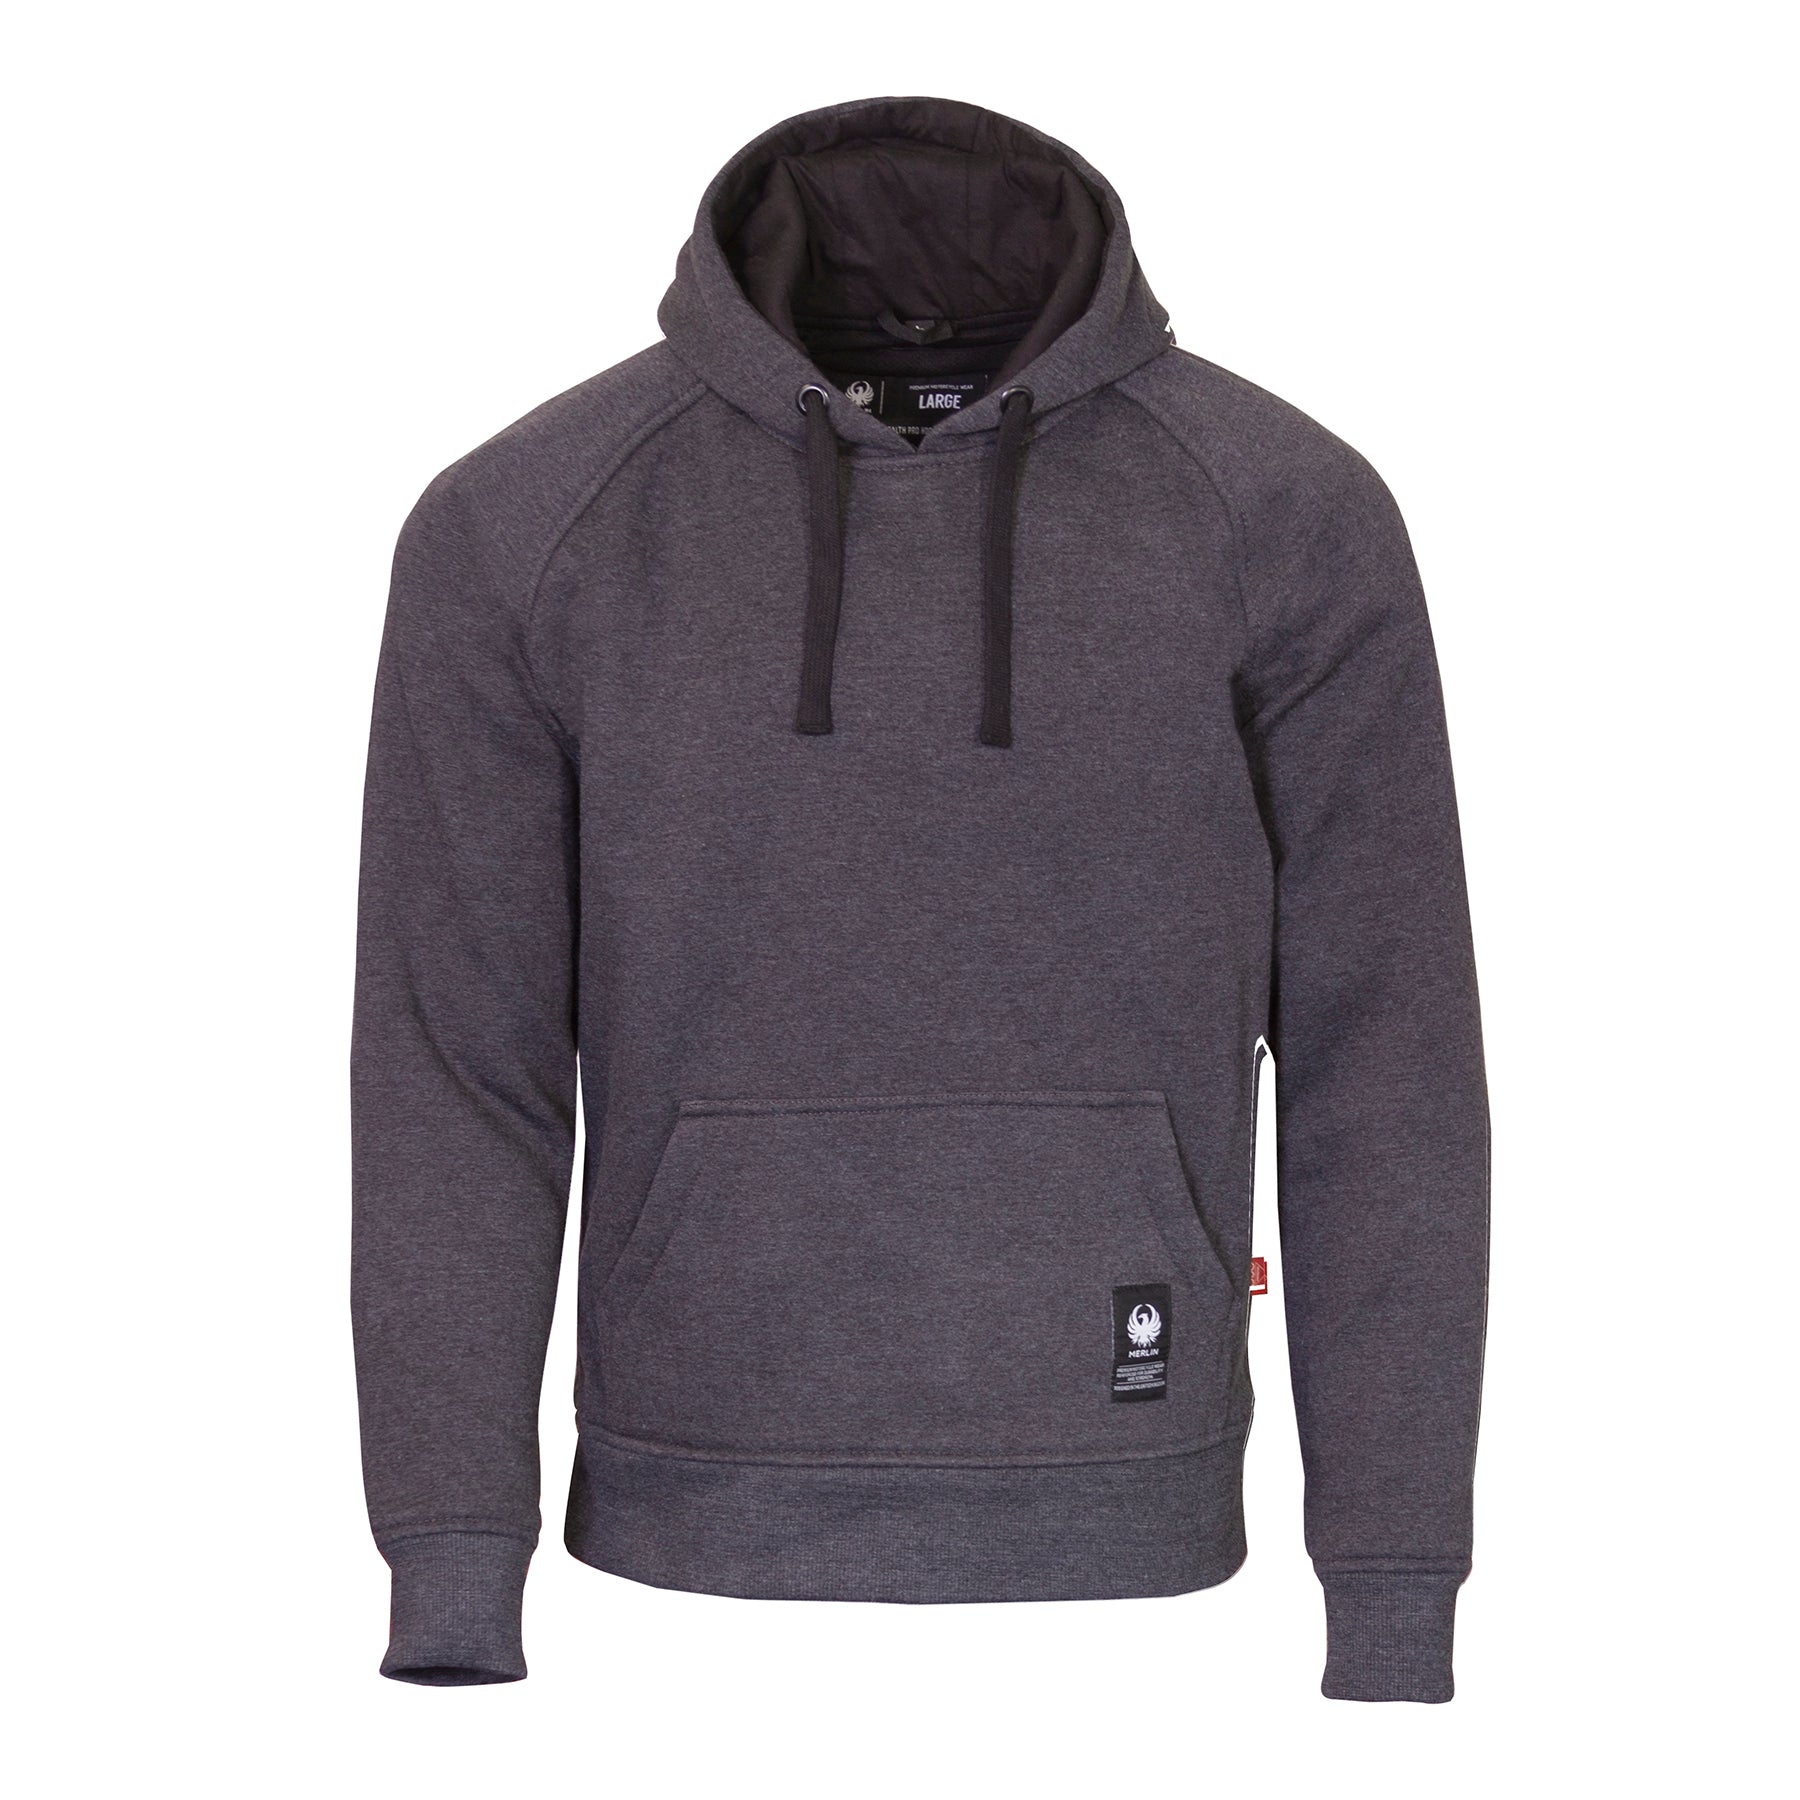 Stealth Pro Single Layer D3O® Pullover Hoody